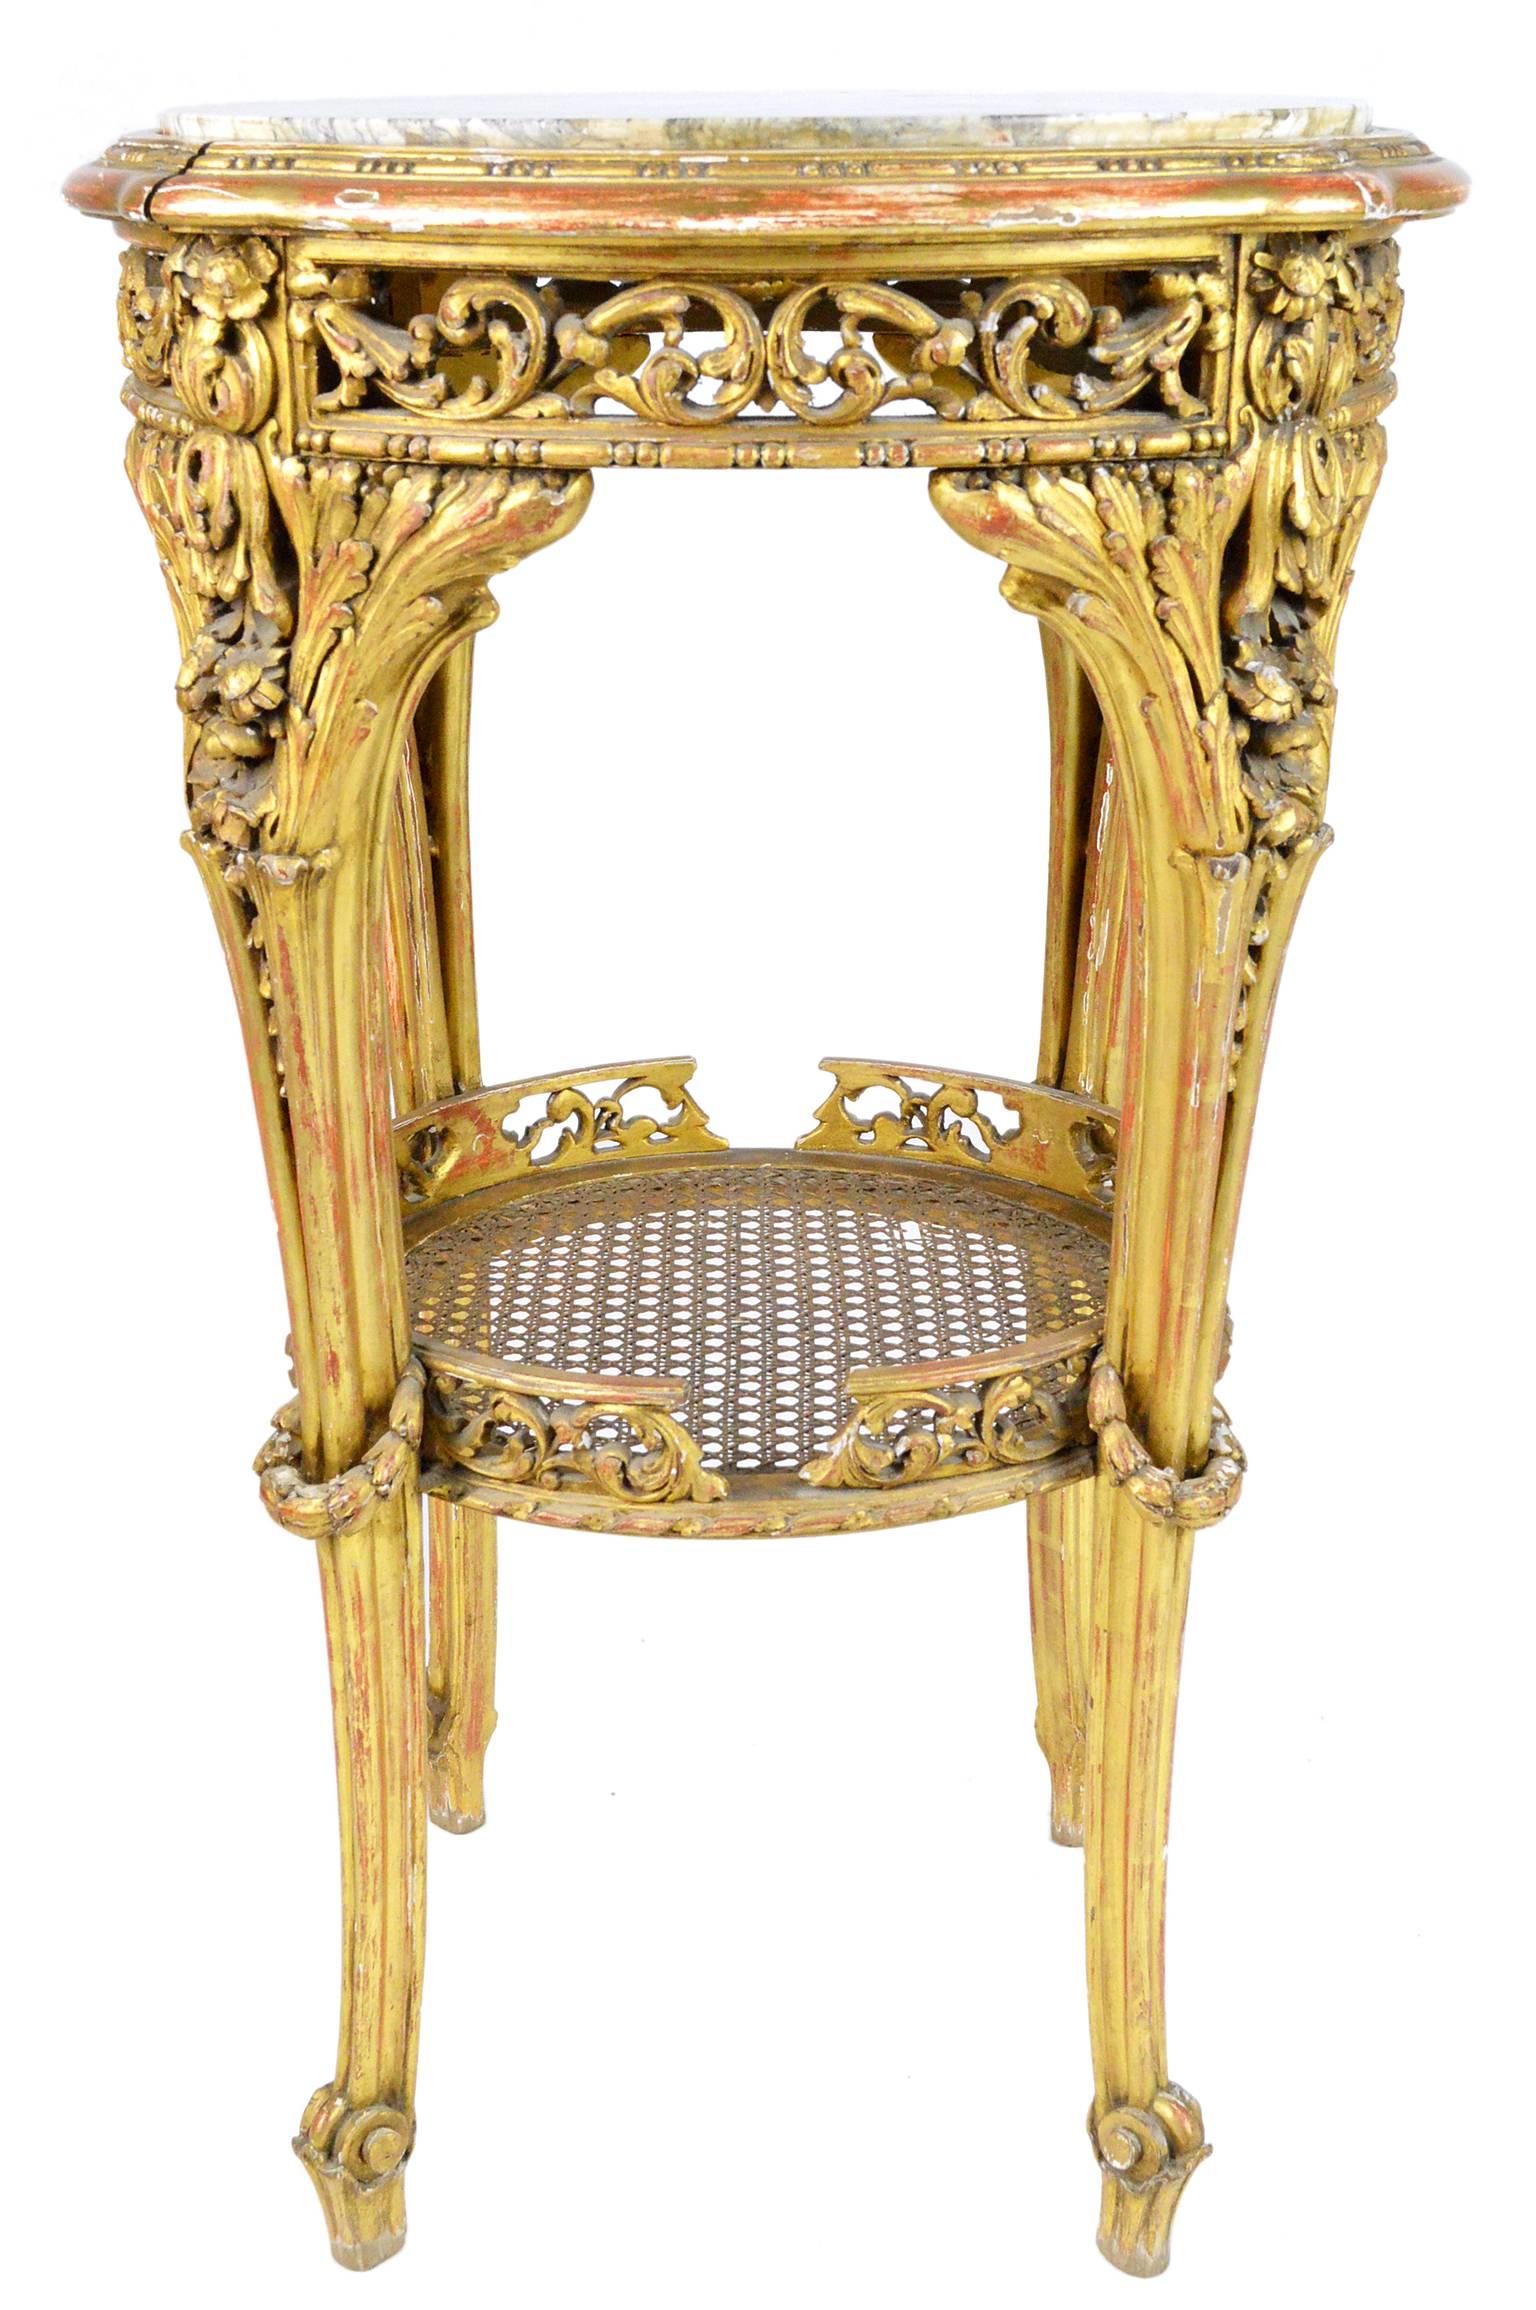 19th Century French Baroque Style Giltwood Marble-Top Table For Sale